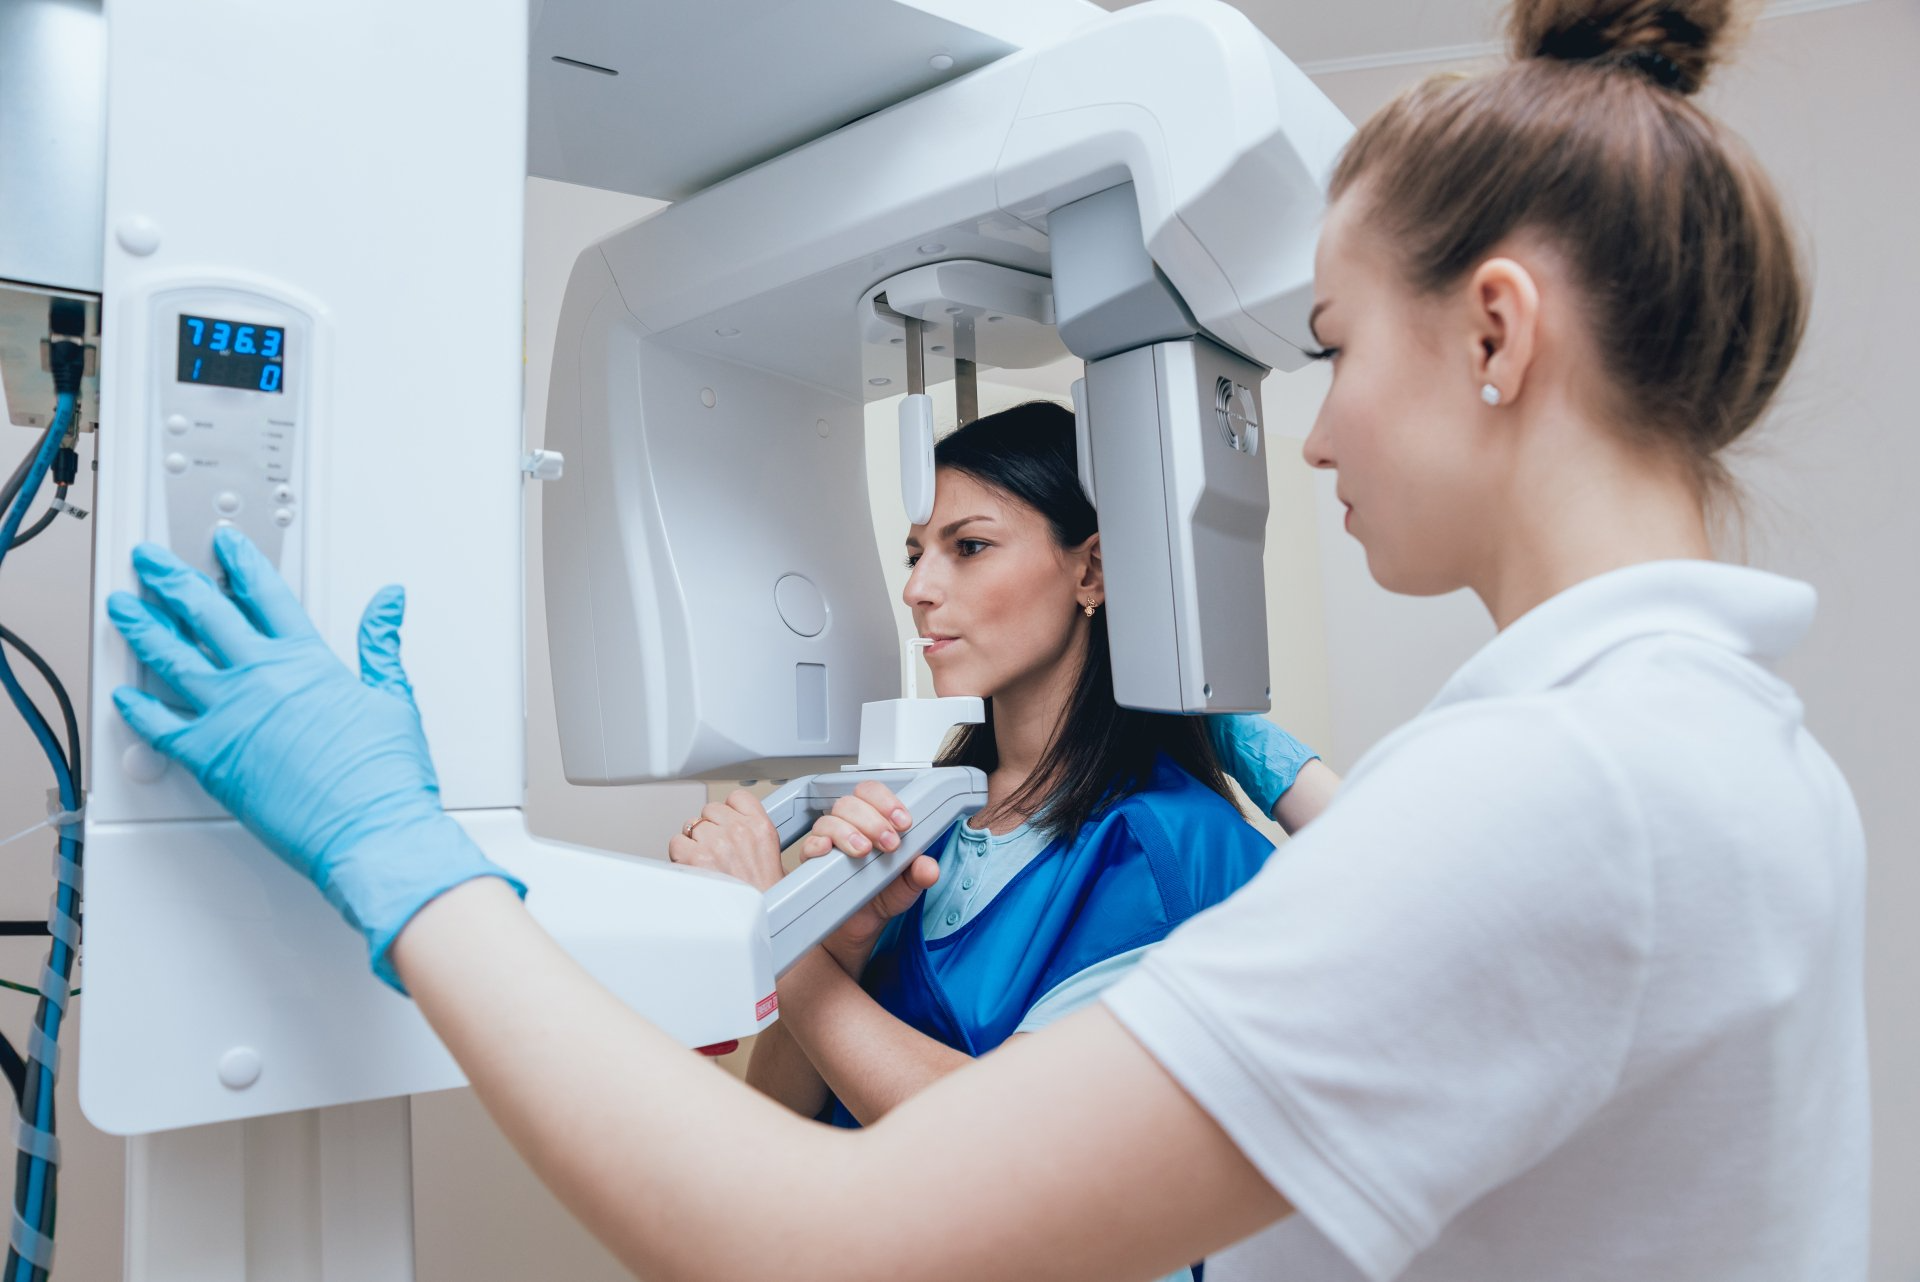 Orthodontic technology | x ray machine | Orthodontist near you | female patient getting an x ray